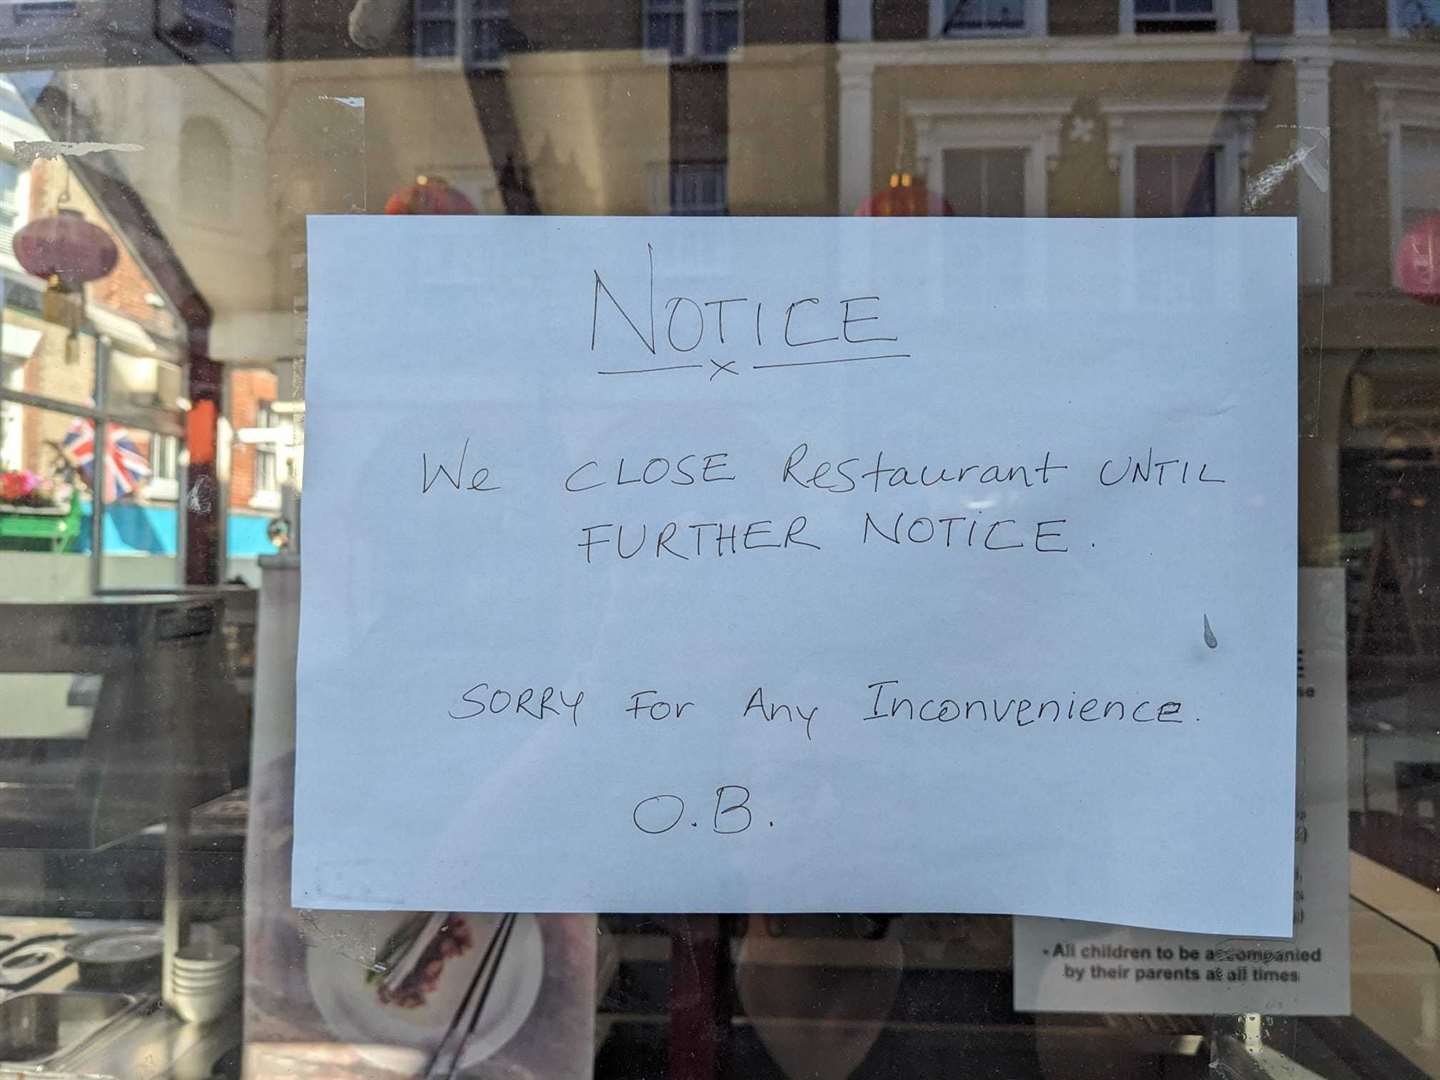 The Oriental Buffet in Folkestone has closed without warning